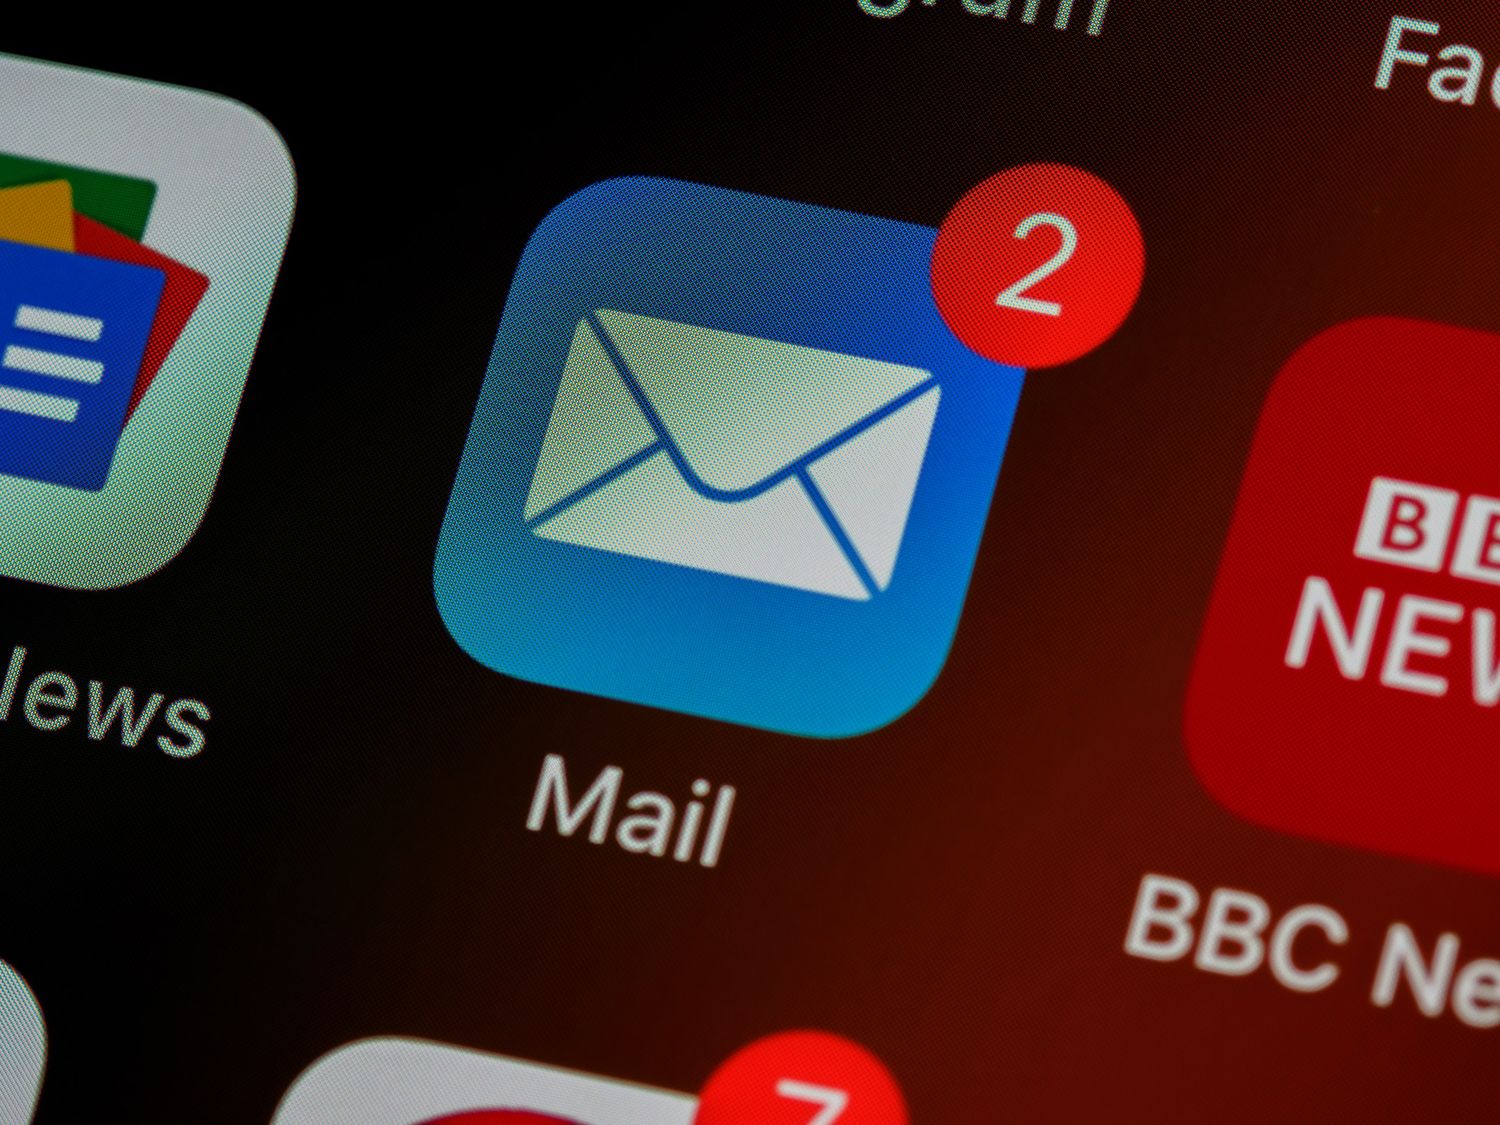 how-to-sync-msn-email-to-iphone-10